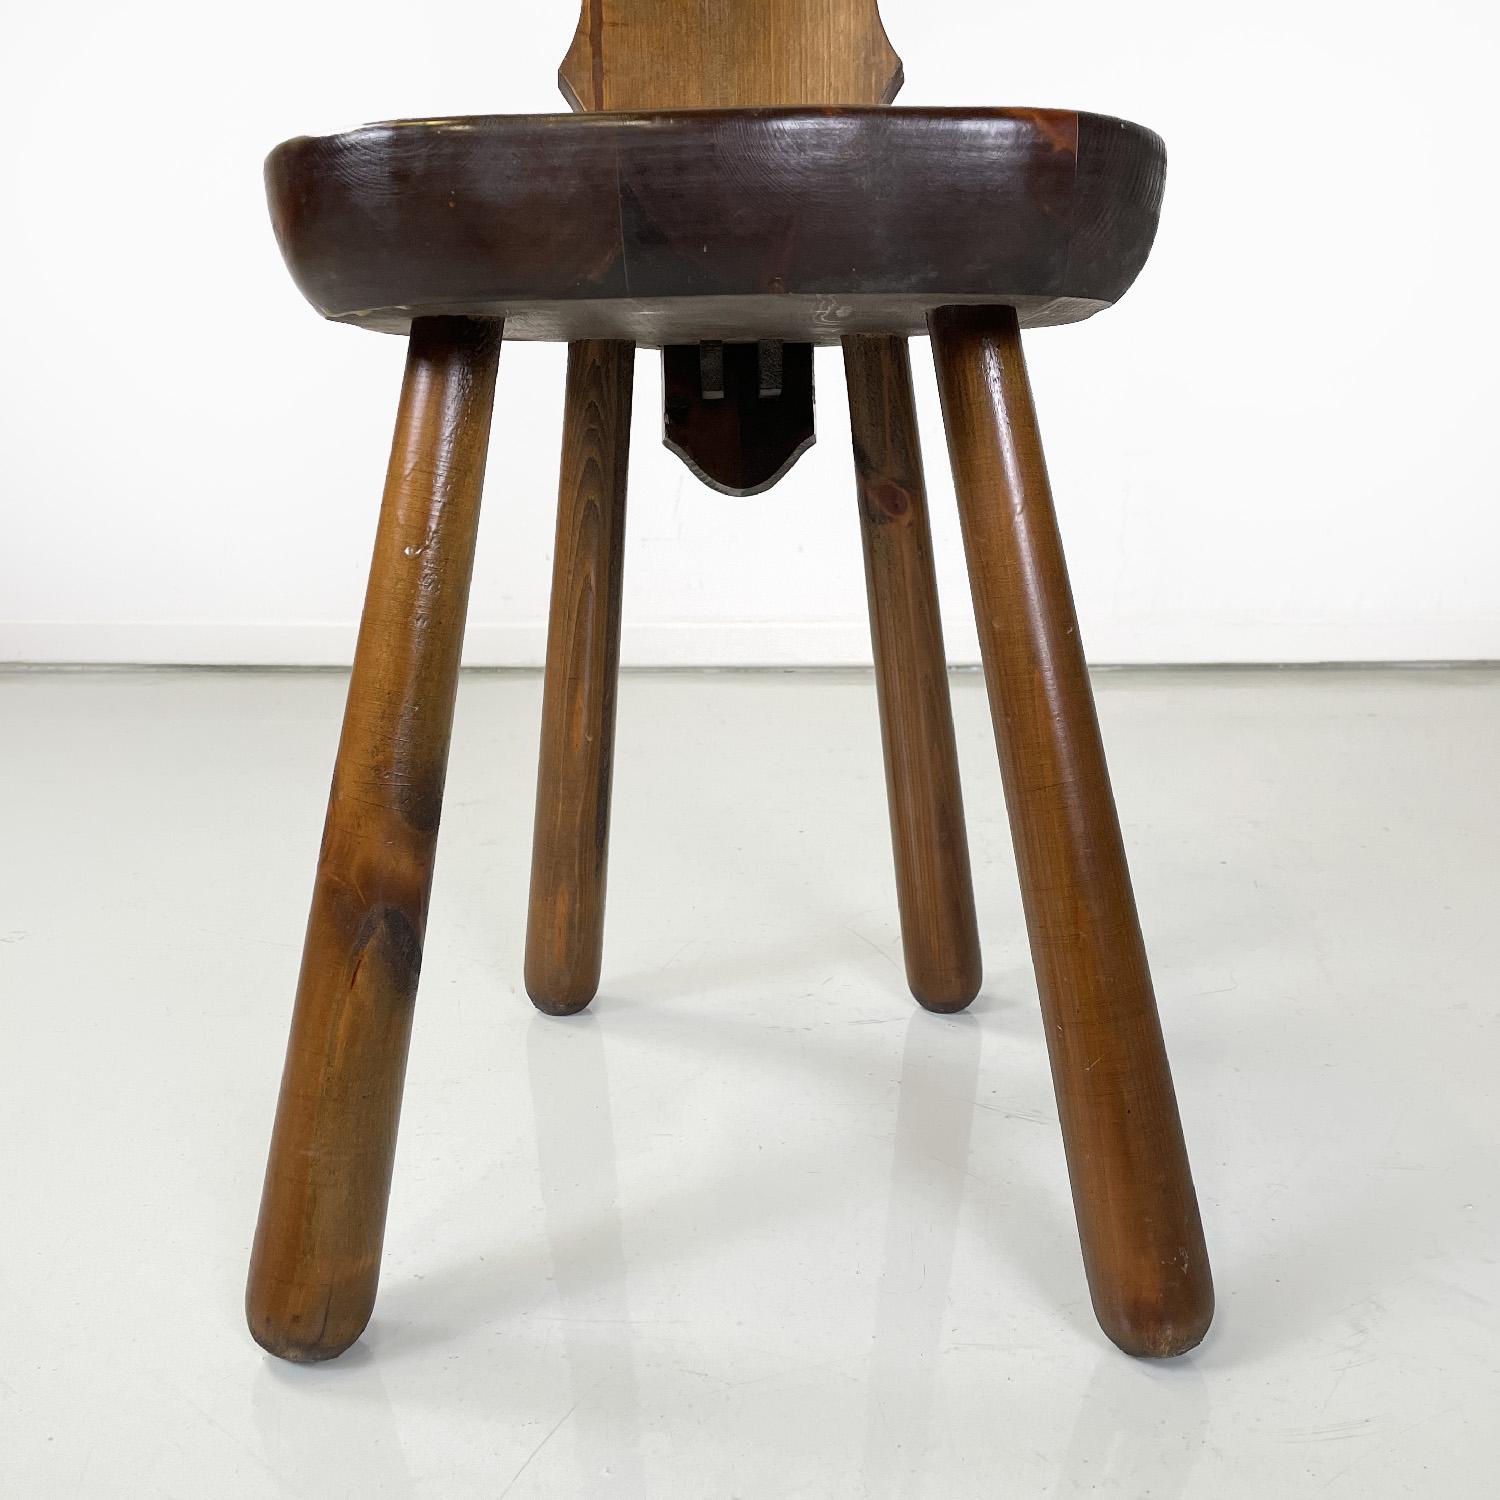 Italian Art Deco wooden chair with rounded profiles, 1940s For Sale 4